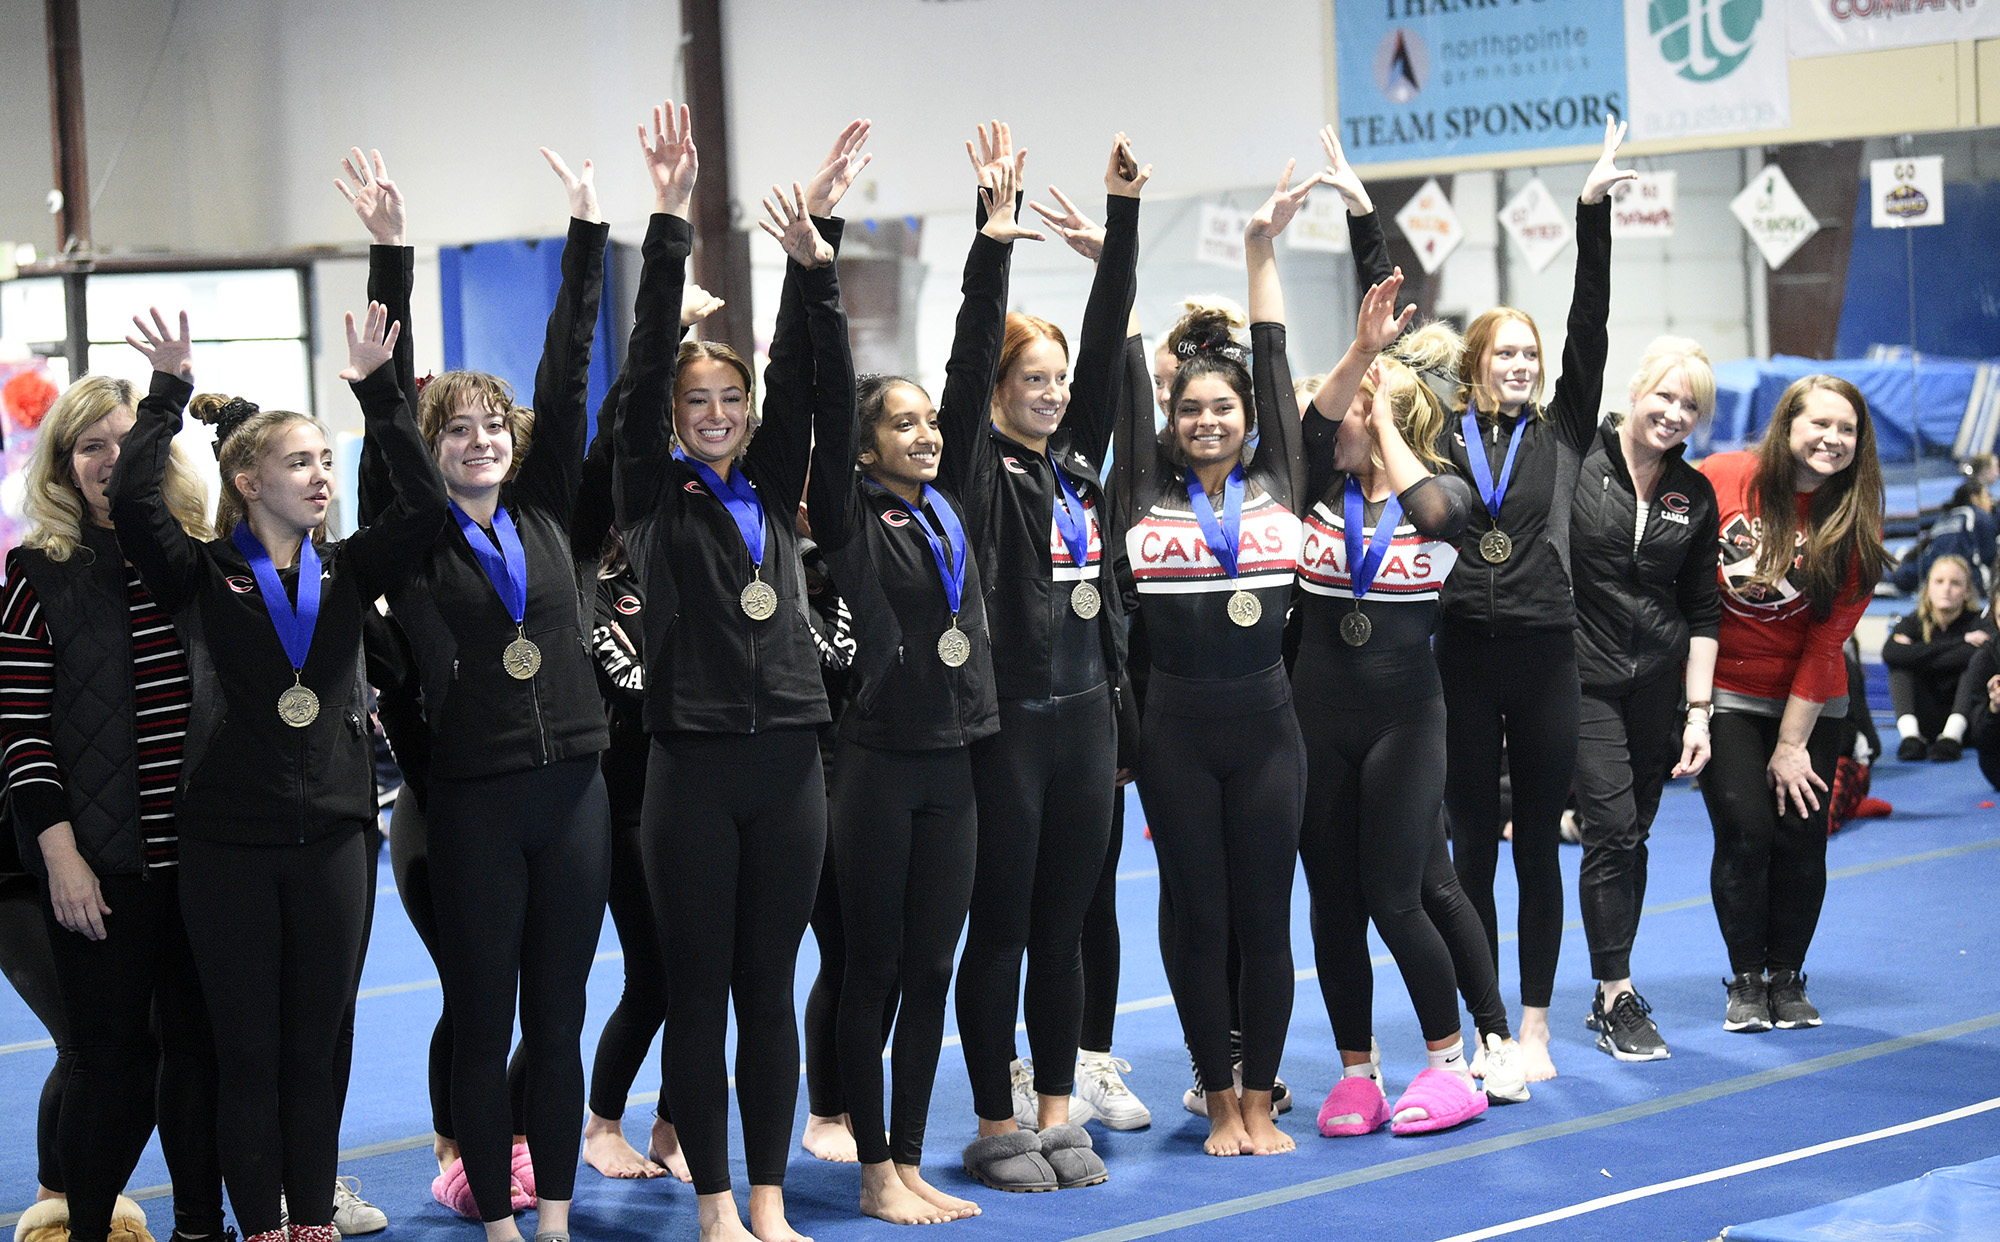 The Camas gymnastics team celebrates its team title at the 4A District 4 meet at Northpointe on Saturday, Feb. 11, 2023.